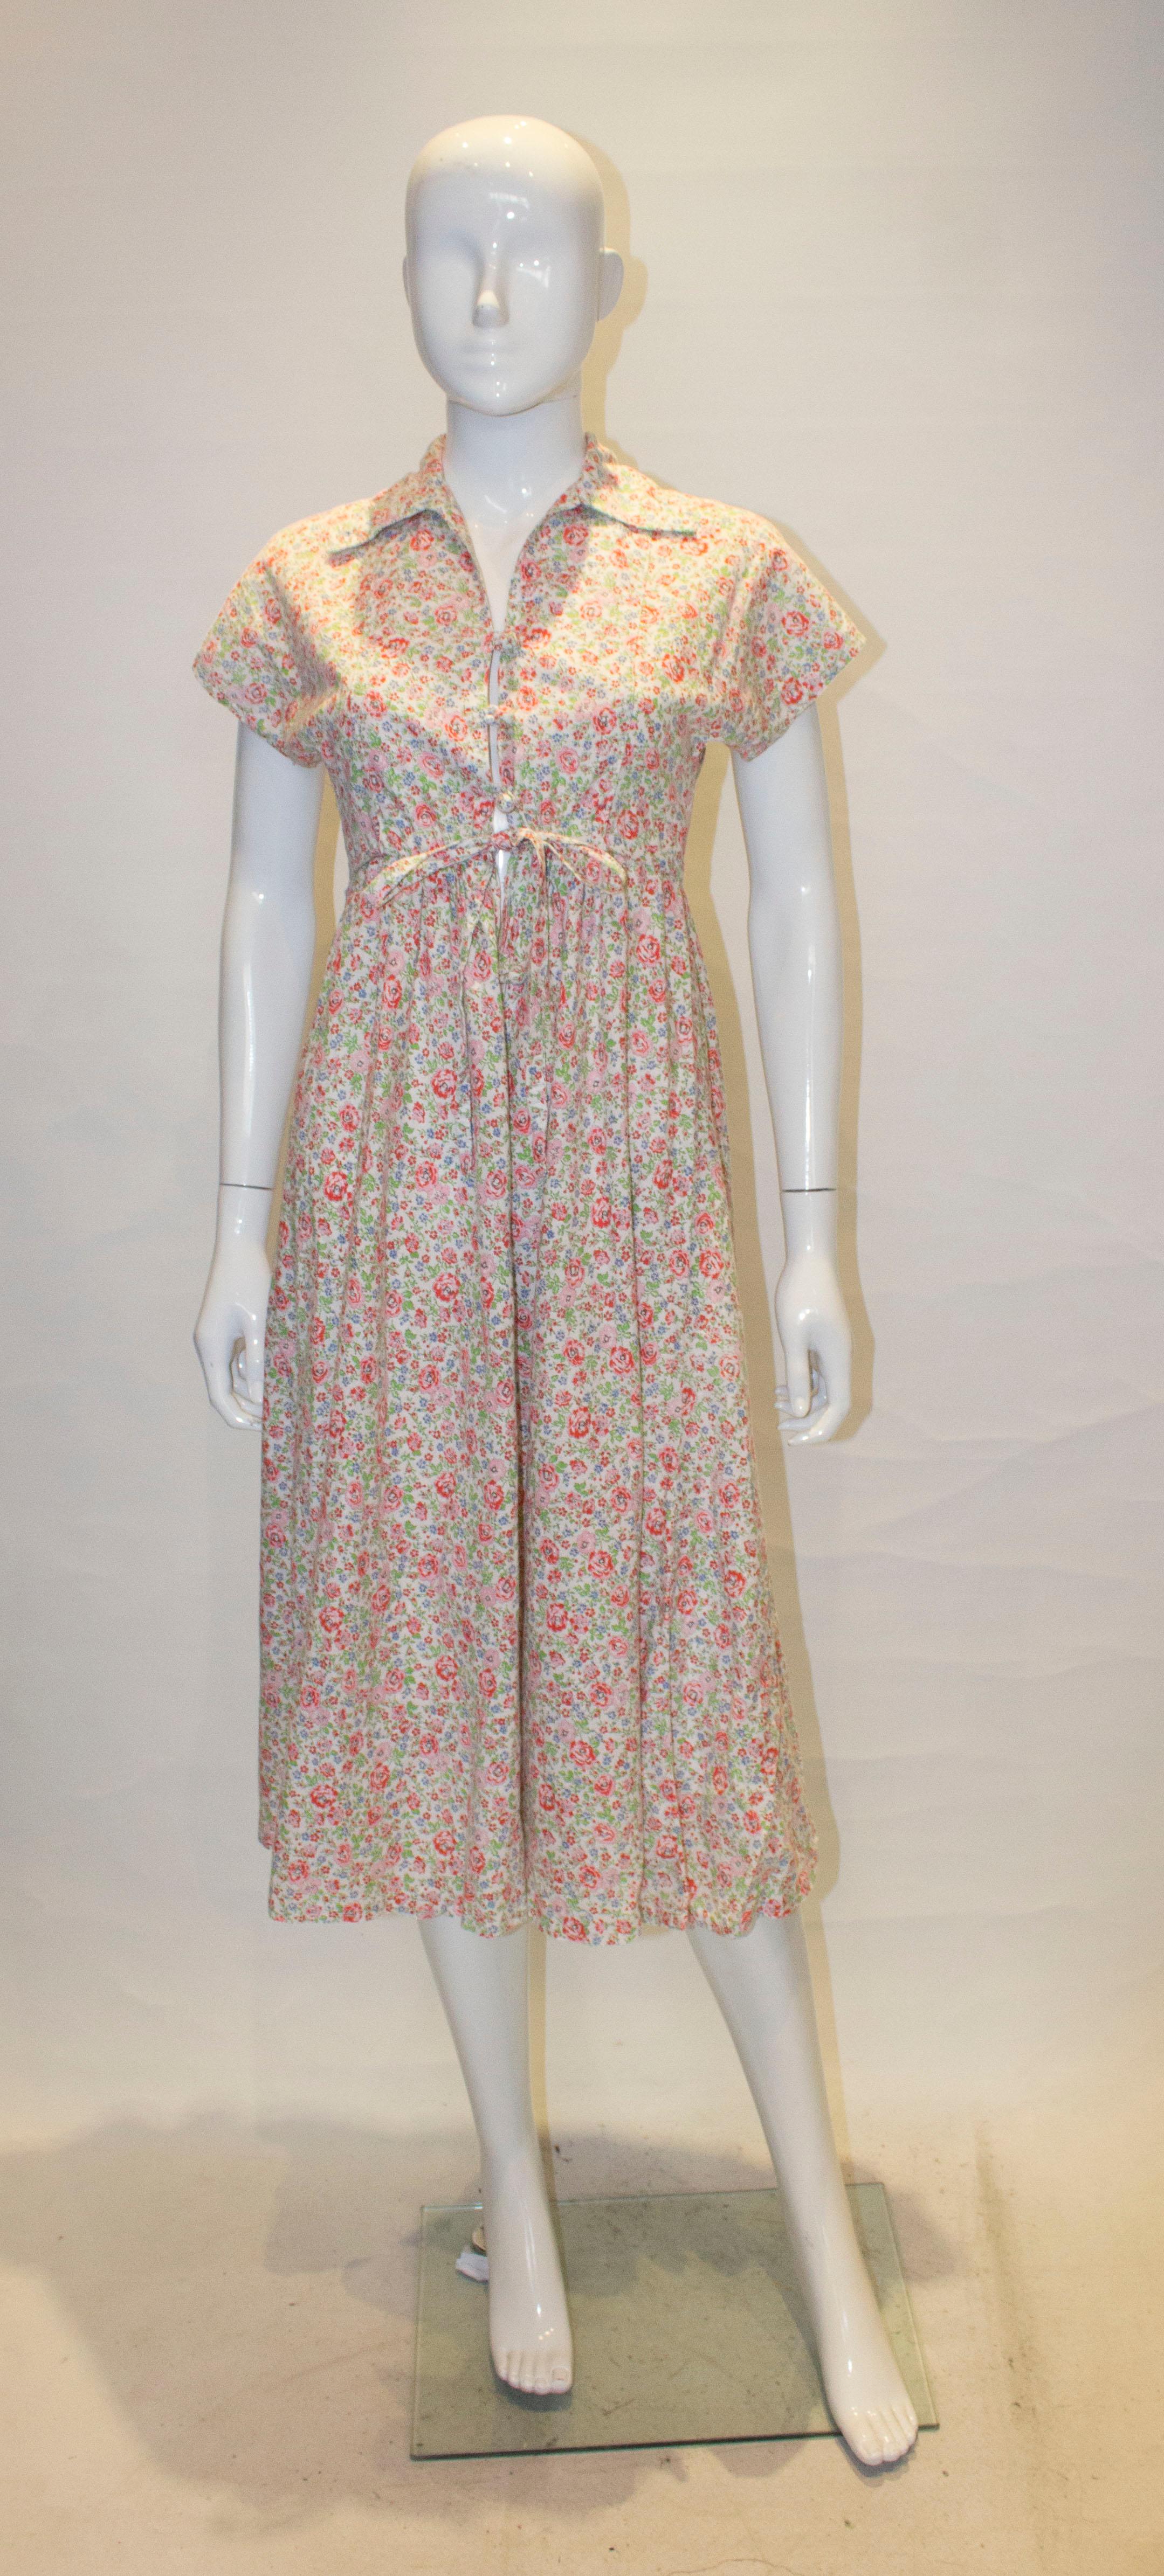 A pretty vintage cotton dress  by David Silverman.  The dress has a  fabric covered button opening at the front with a drawstring waist.,measuring from 25'' - 28'' , and cap sleeves.